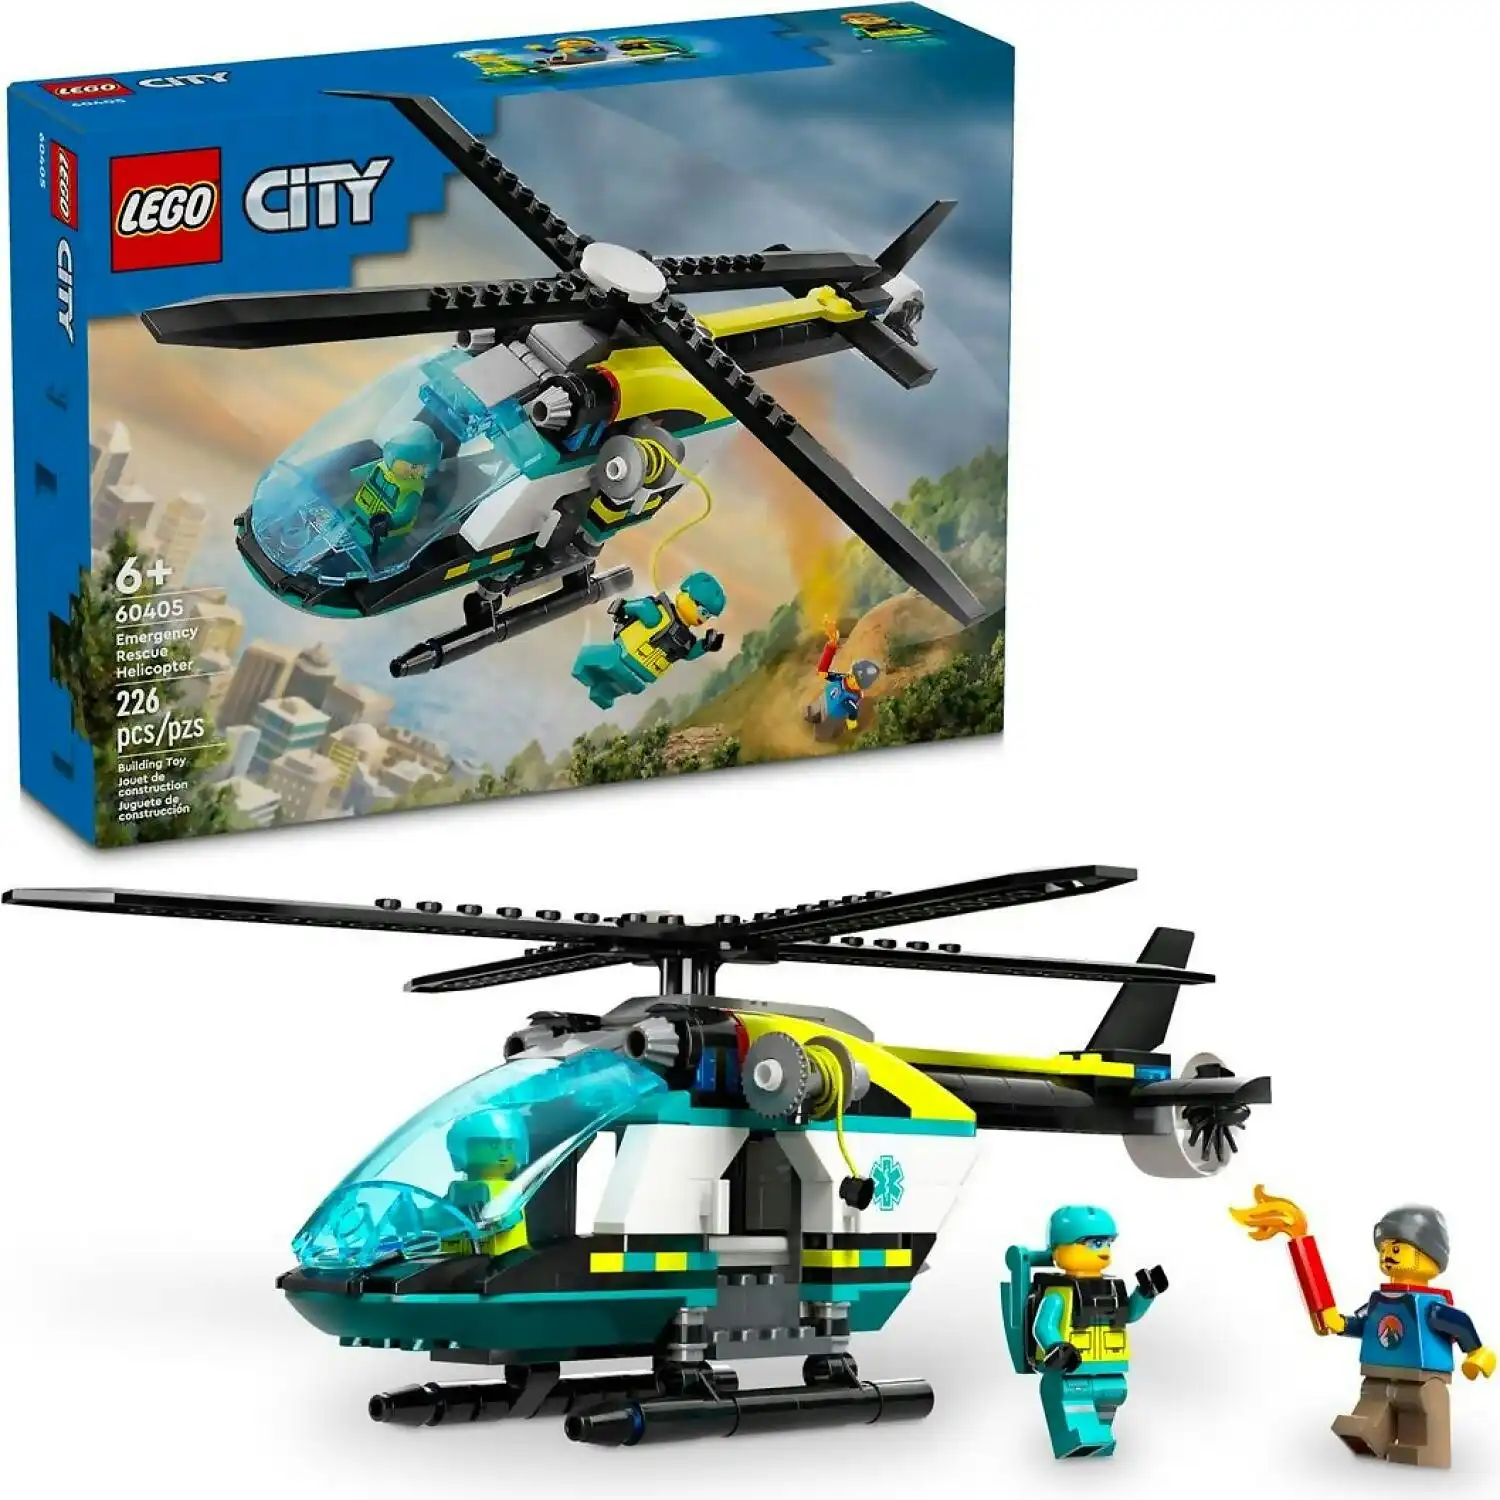 LEGO 60405 Emergency Rescue Helicopter - City